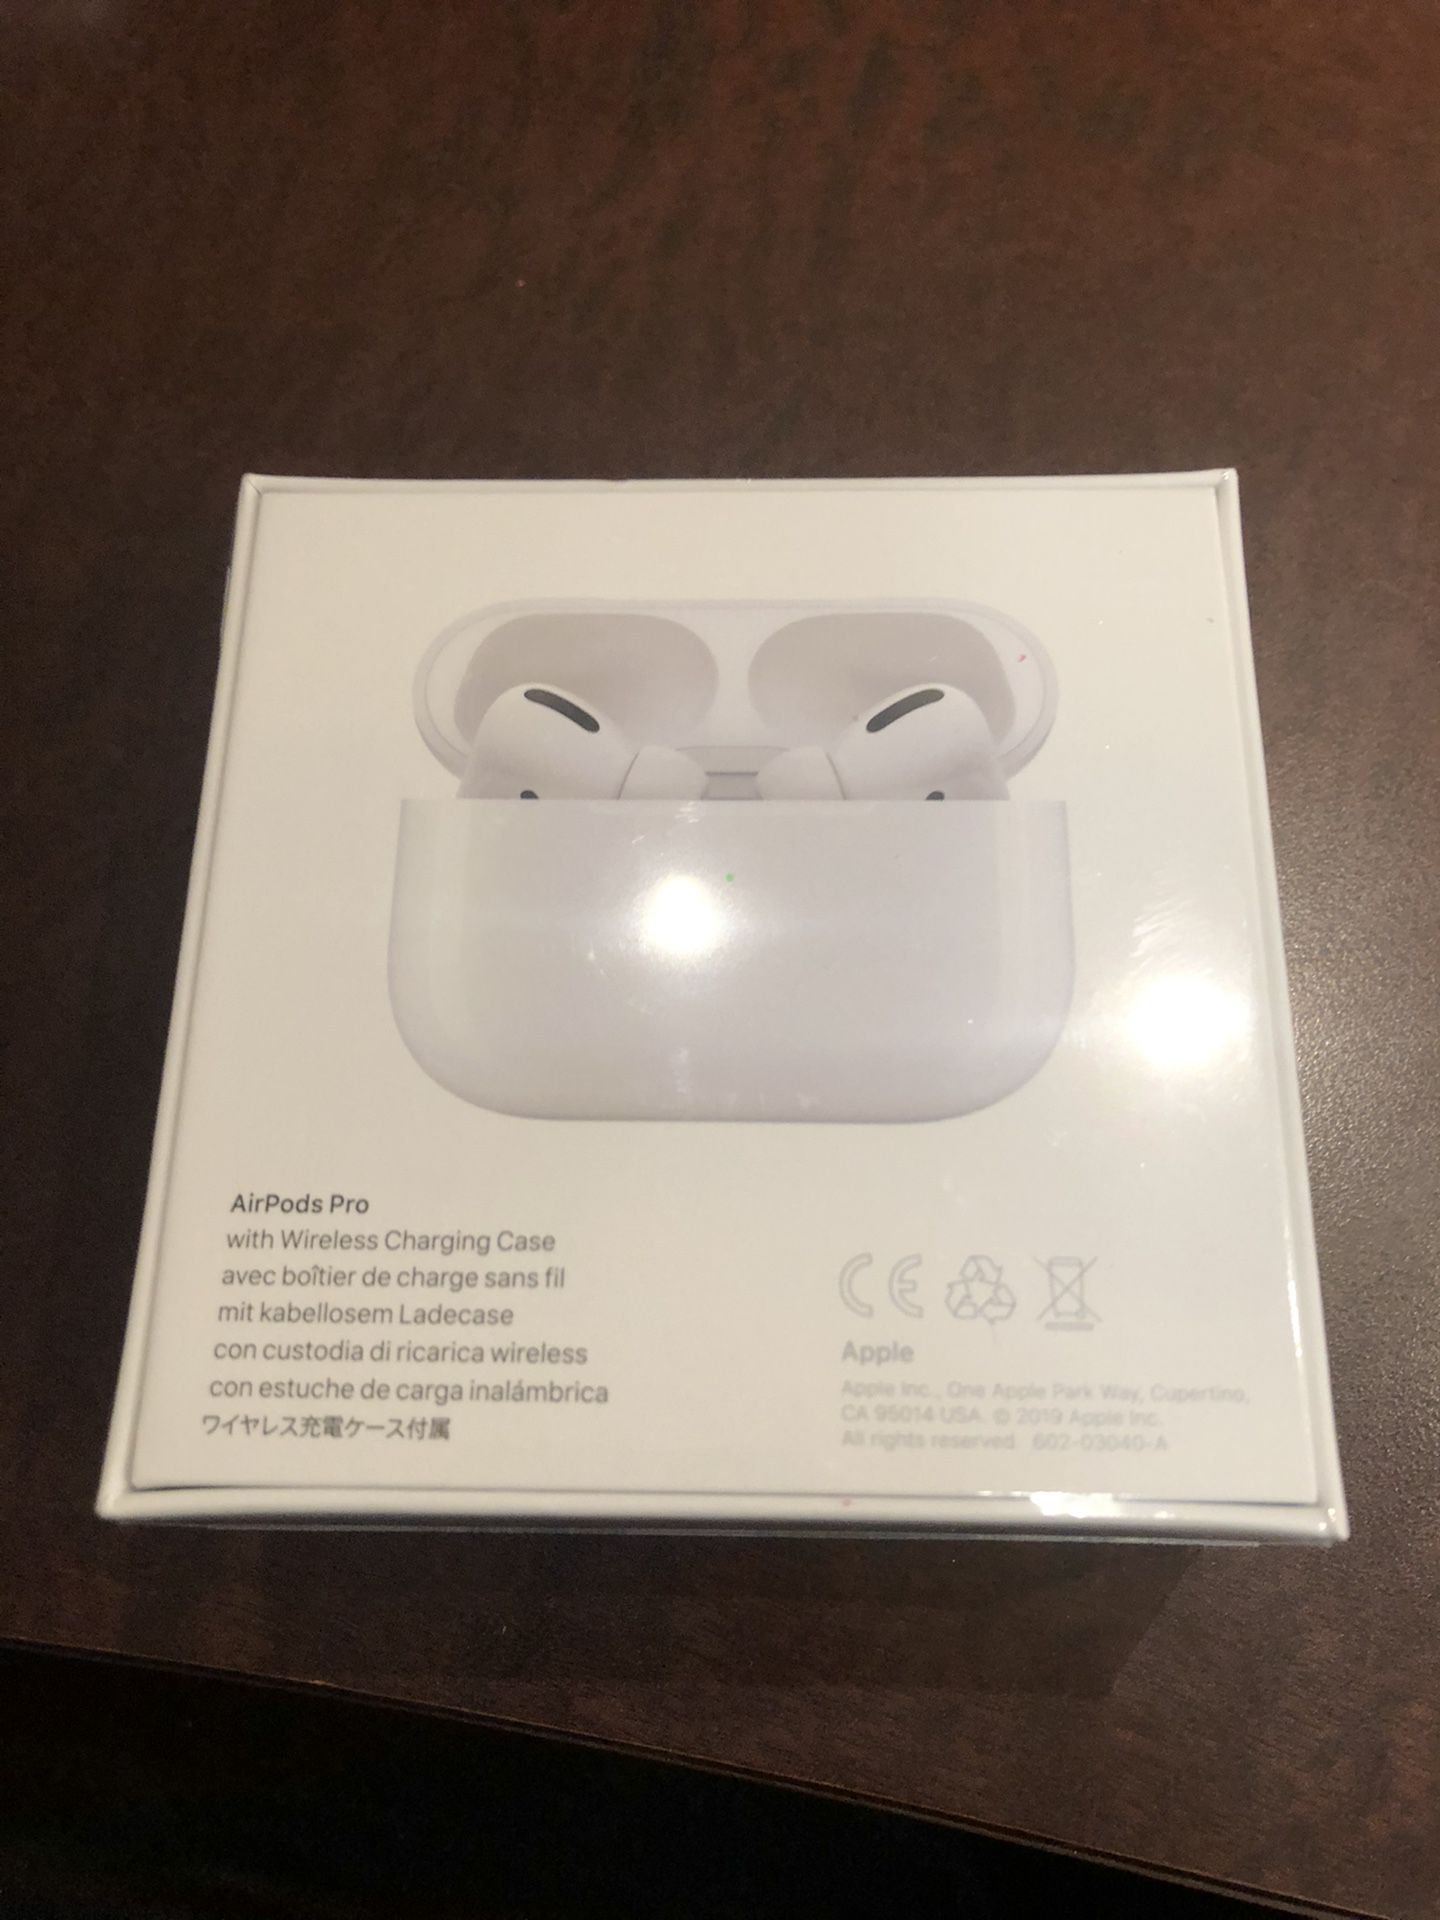 AirPods Pro - Brand New still in original packaging